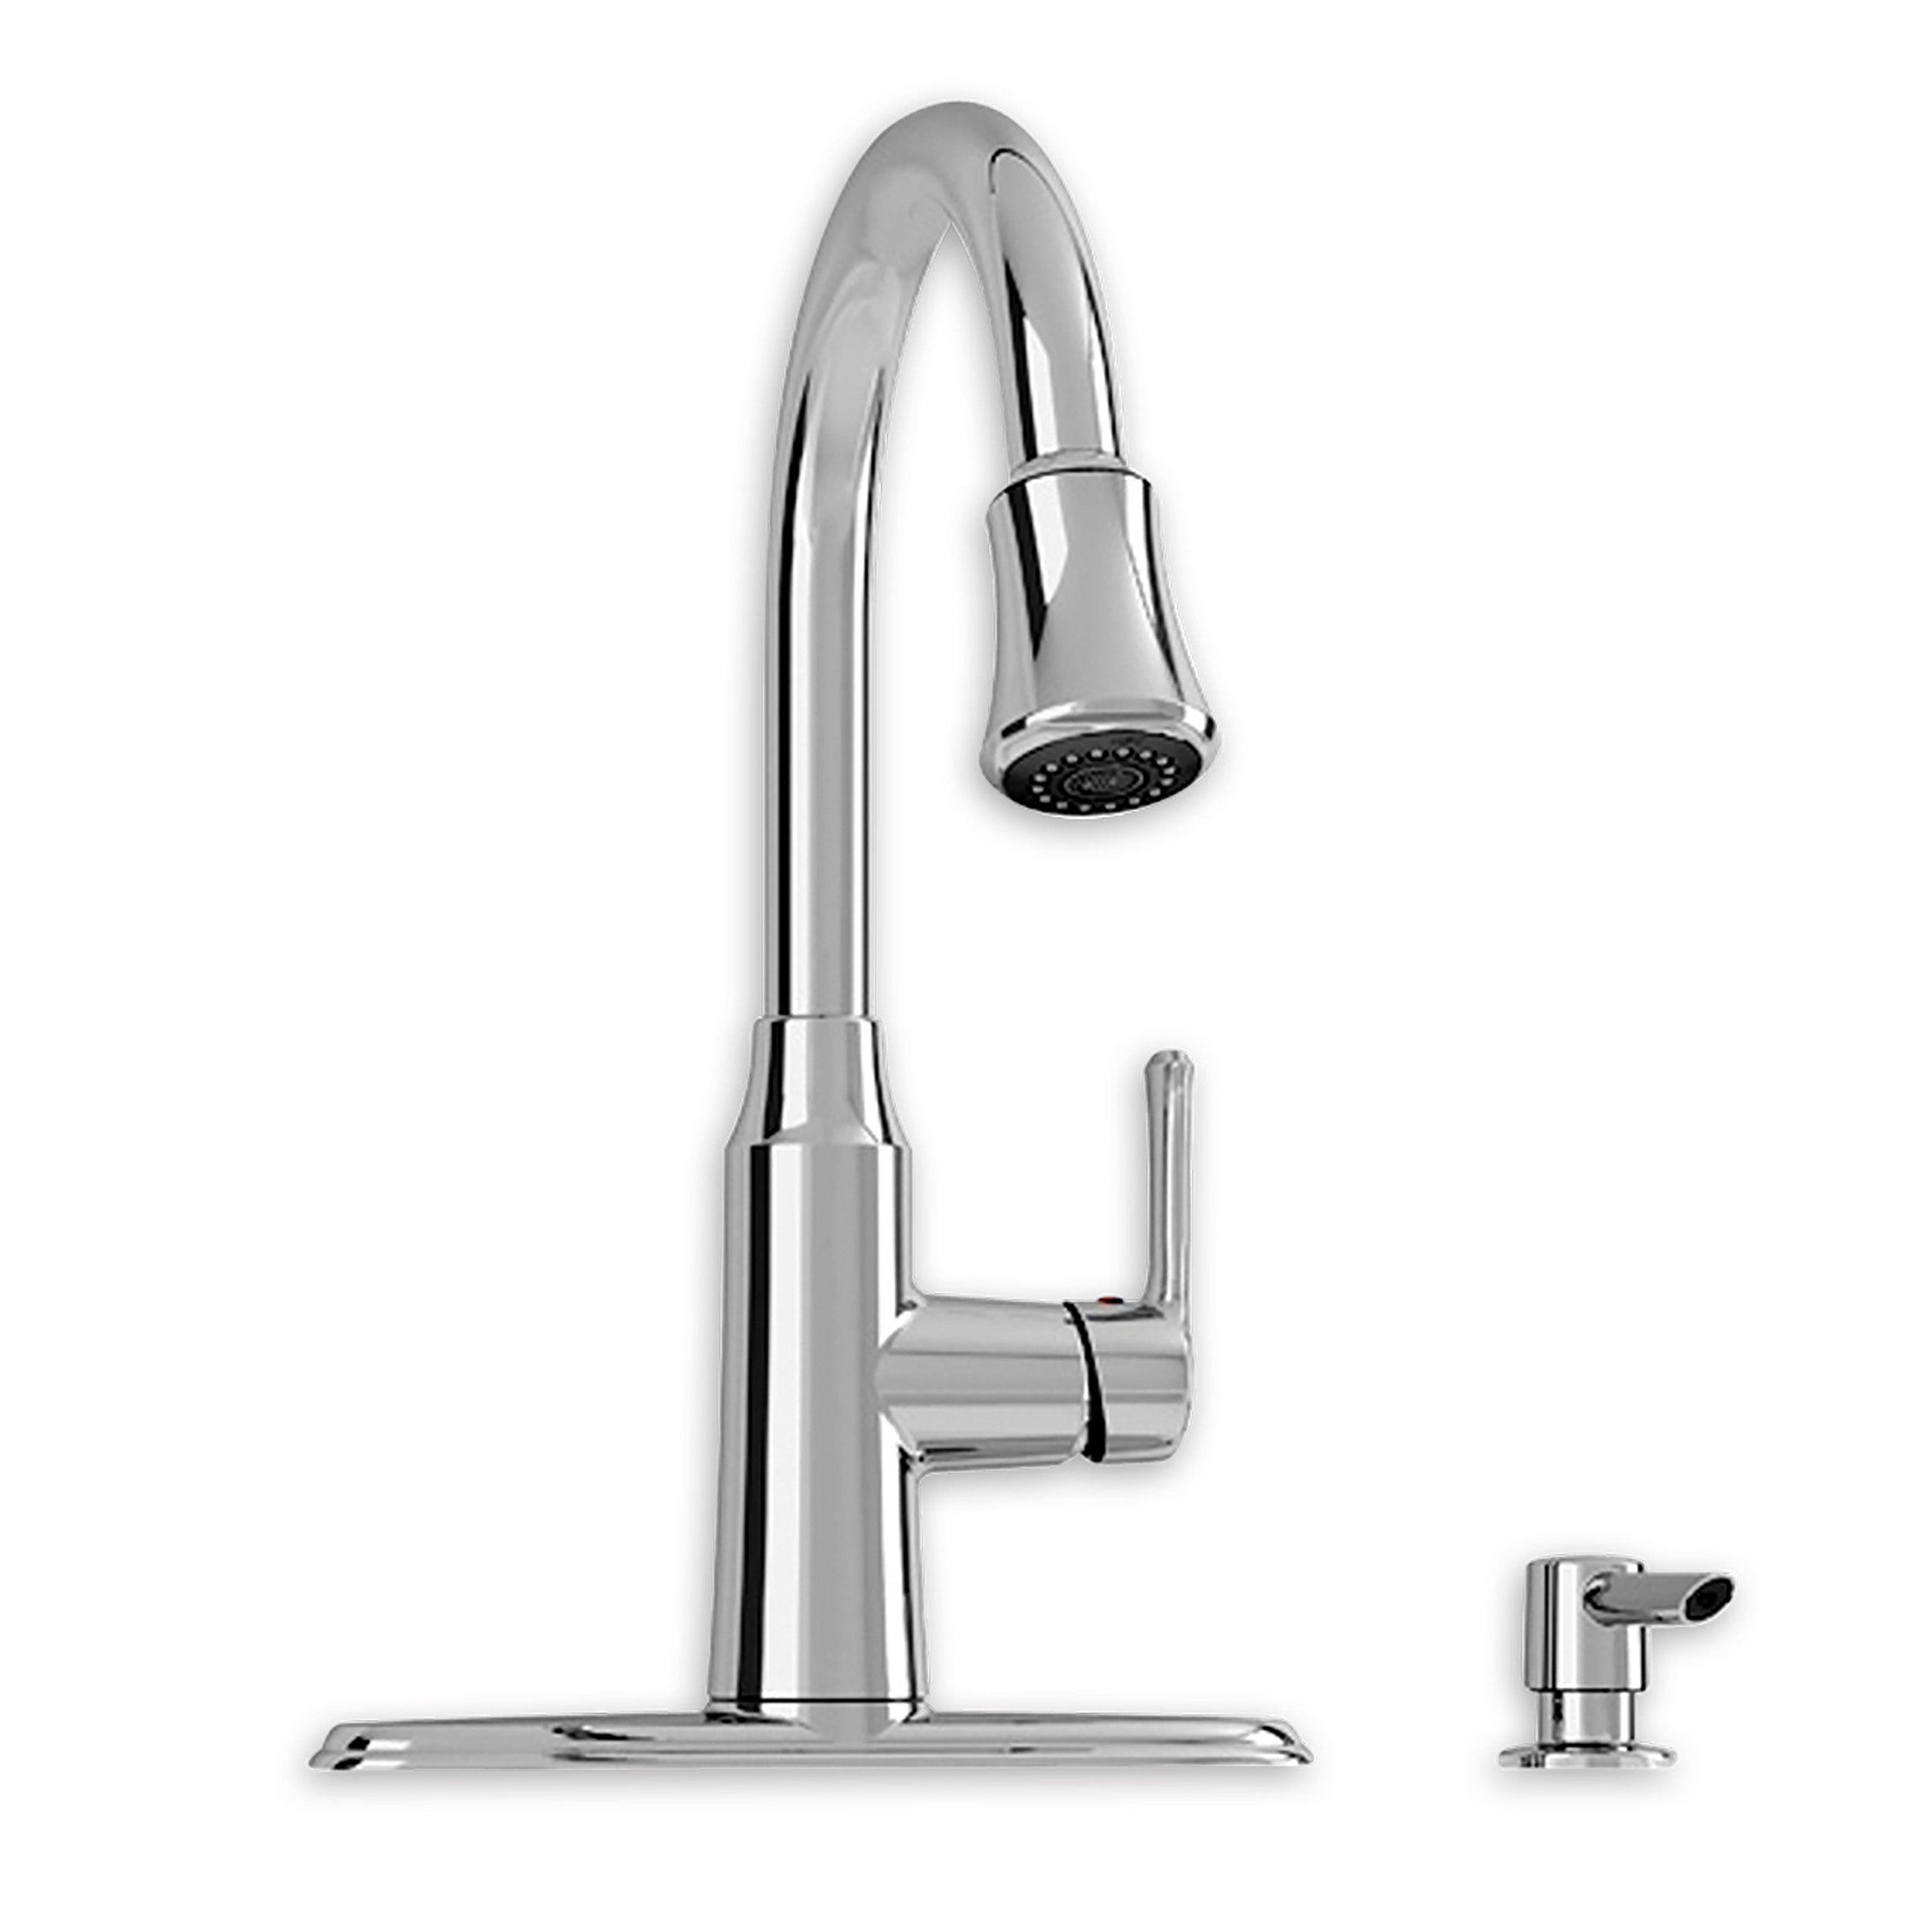 Soltura 1 Handle Pull Down High Arc Kitchen Faucet with Soap Dispenser